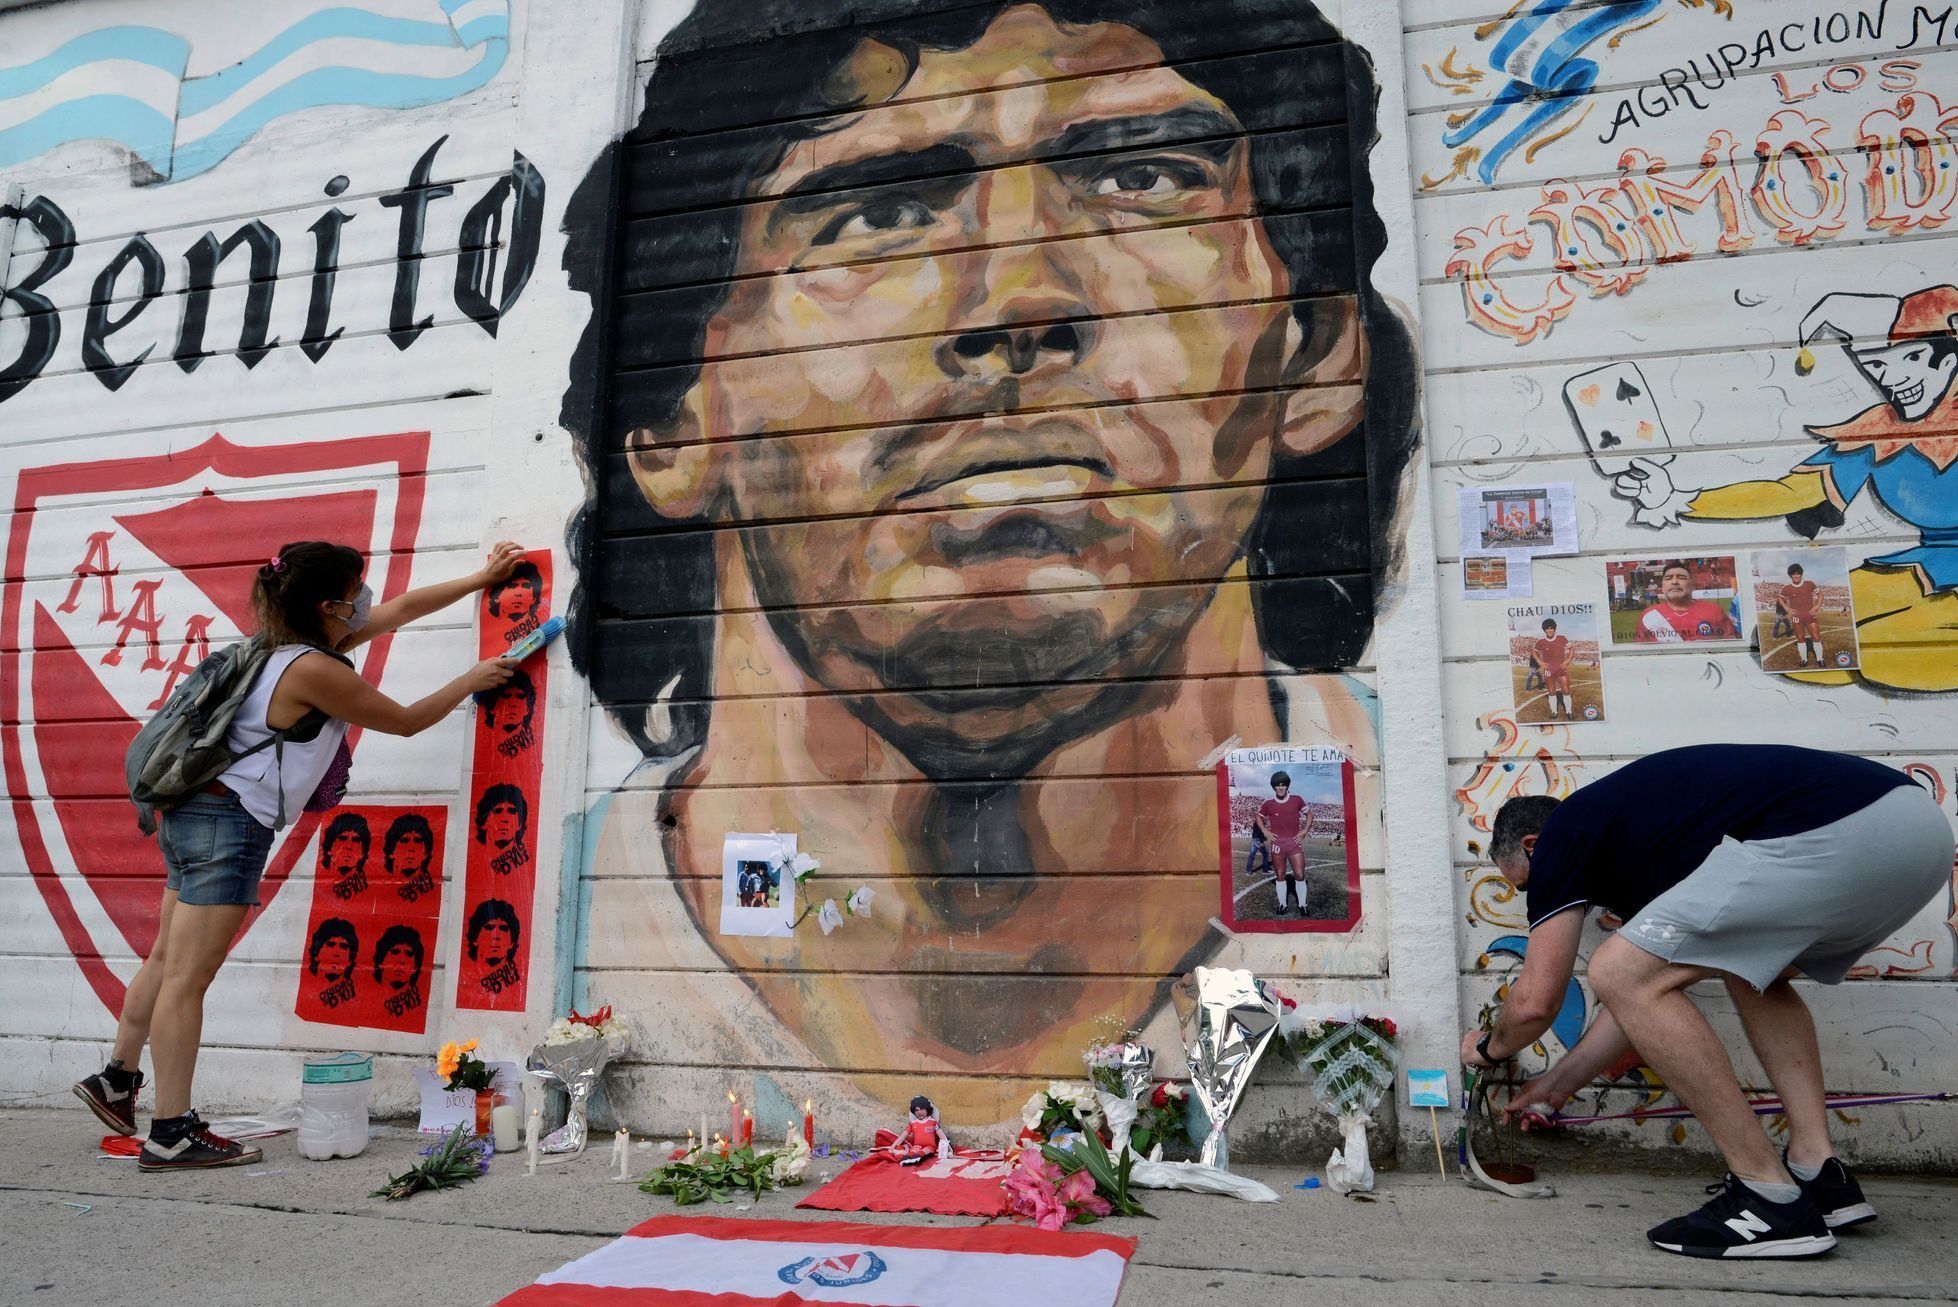 People gather to mourn the death of soccer legend Diego Maradona, outside the Diego Amrando Maradona stadium, in Buenos Aires